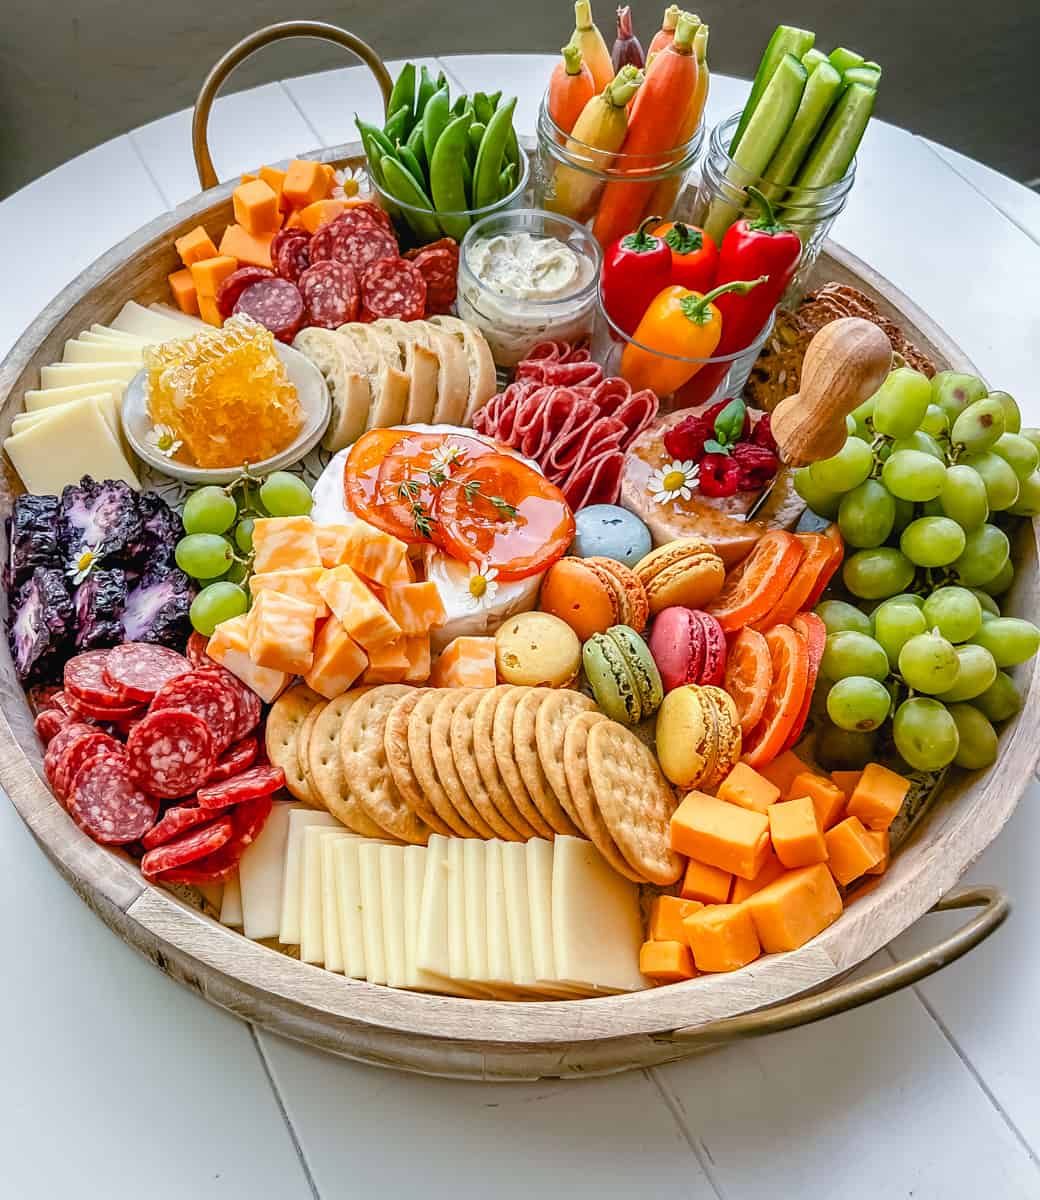 A beautiful Spring Charcuterie Board with fresh ripe fruits, creamy cheeses, crisp vegetables, cured meats, crackers, French baguette slices, honeycomb, macarons, and edible flowers. This is a perfect Spring entertaining board.